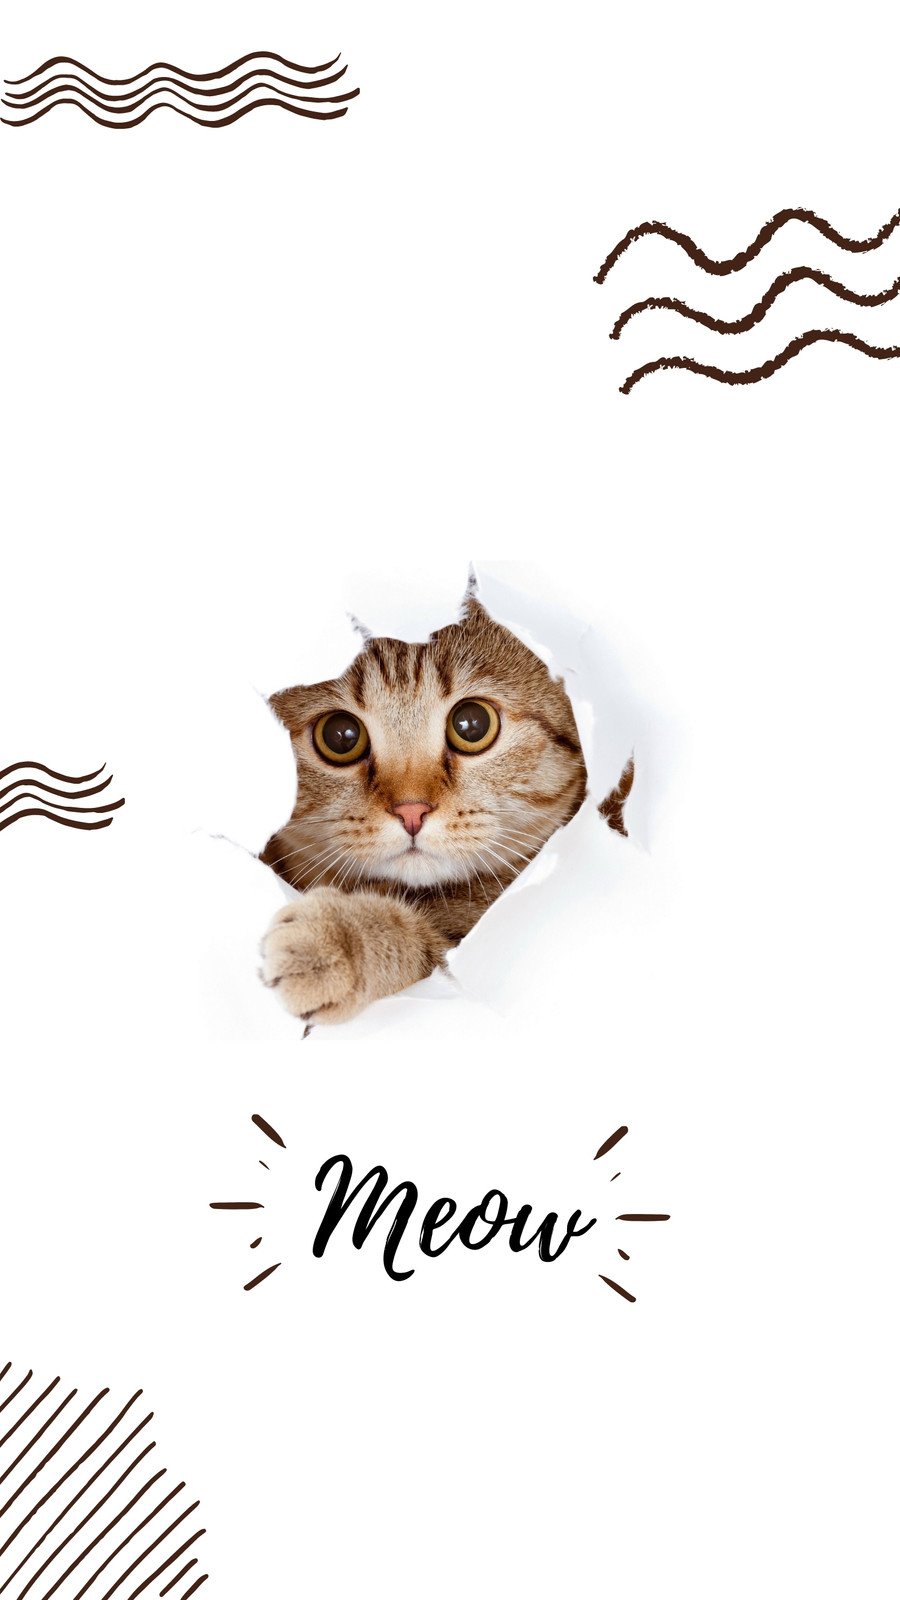 Free and customizable cute cat wallpaper templates